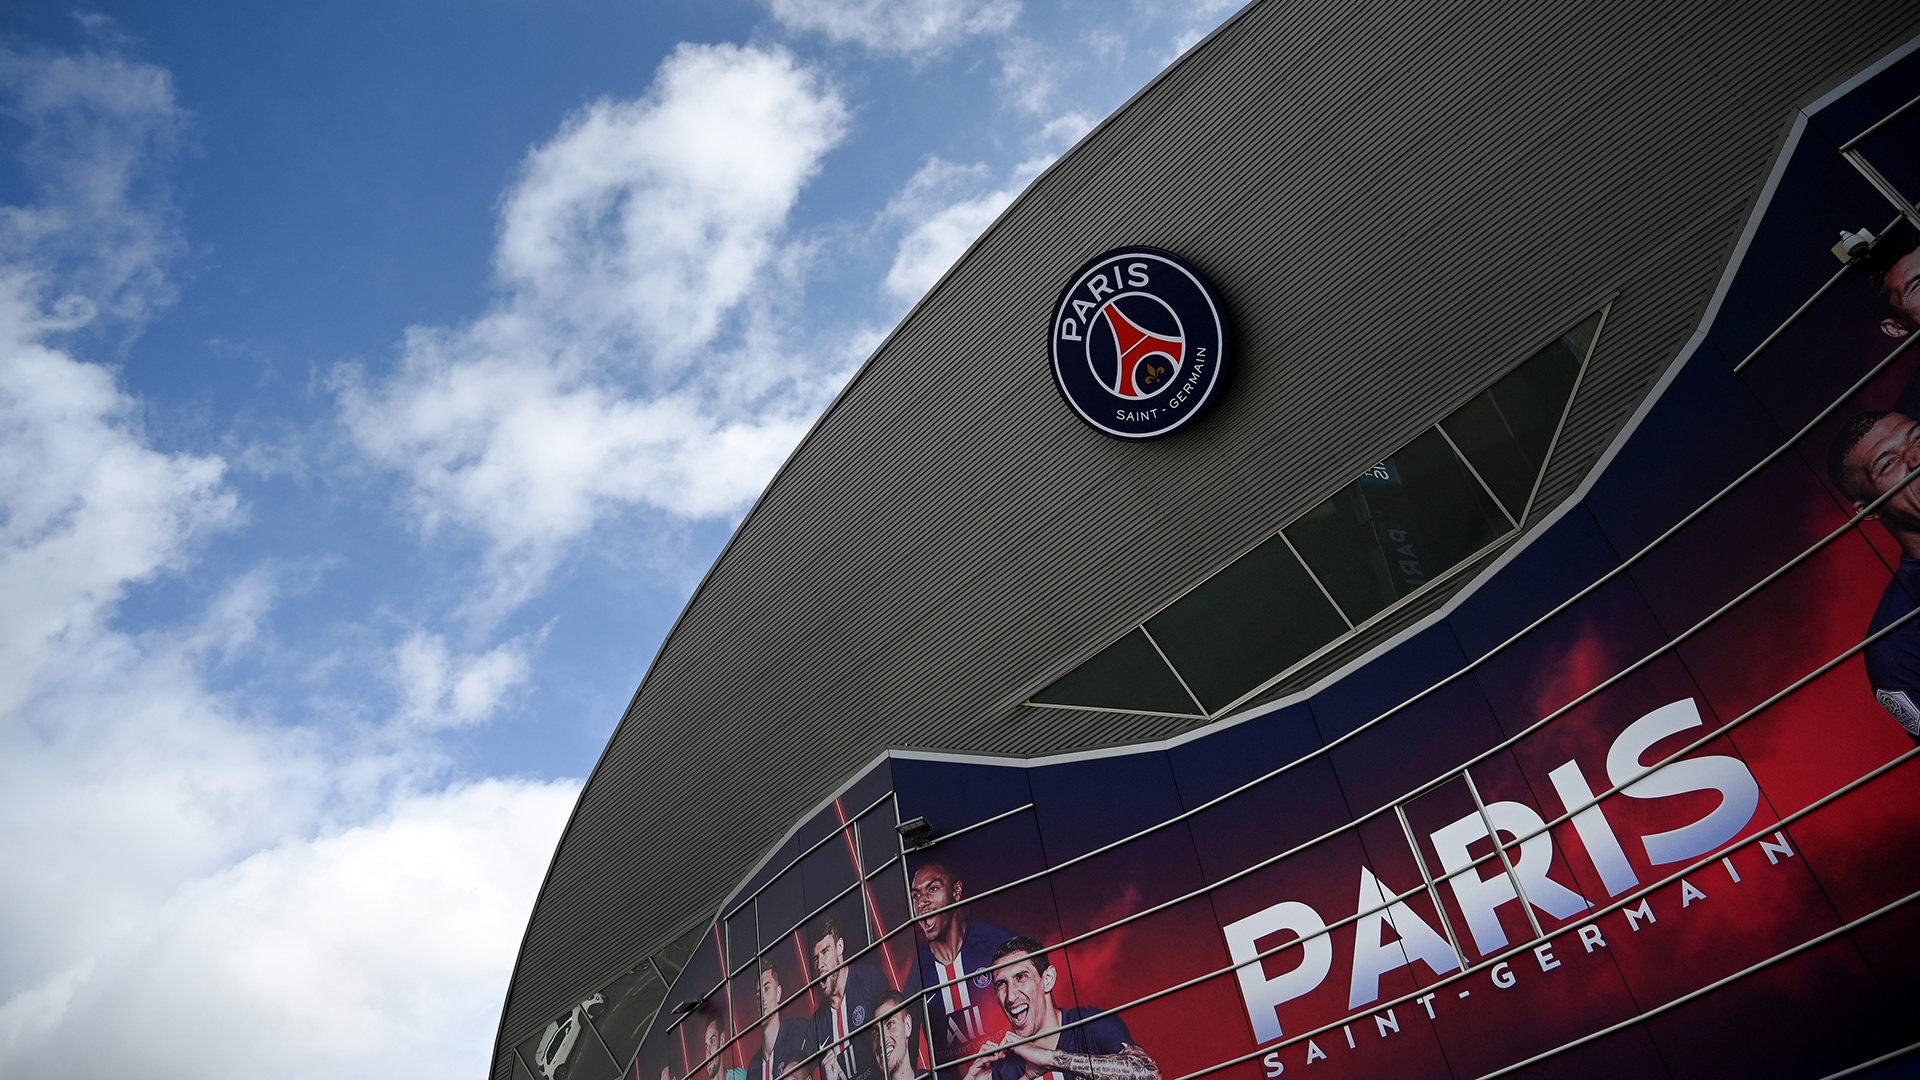 Why are there no fans at the PSG vs Dortmund Champions League match?